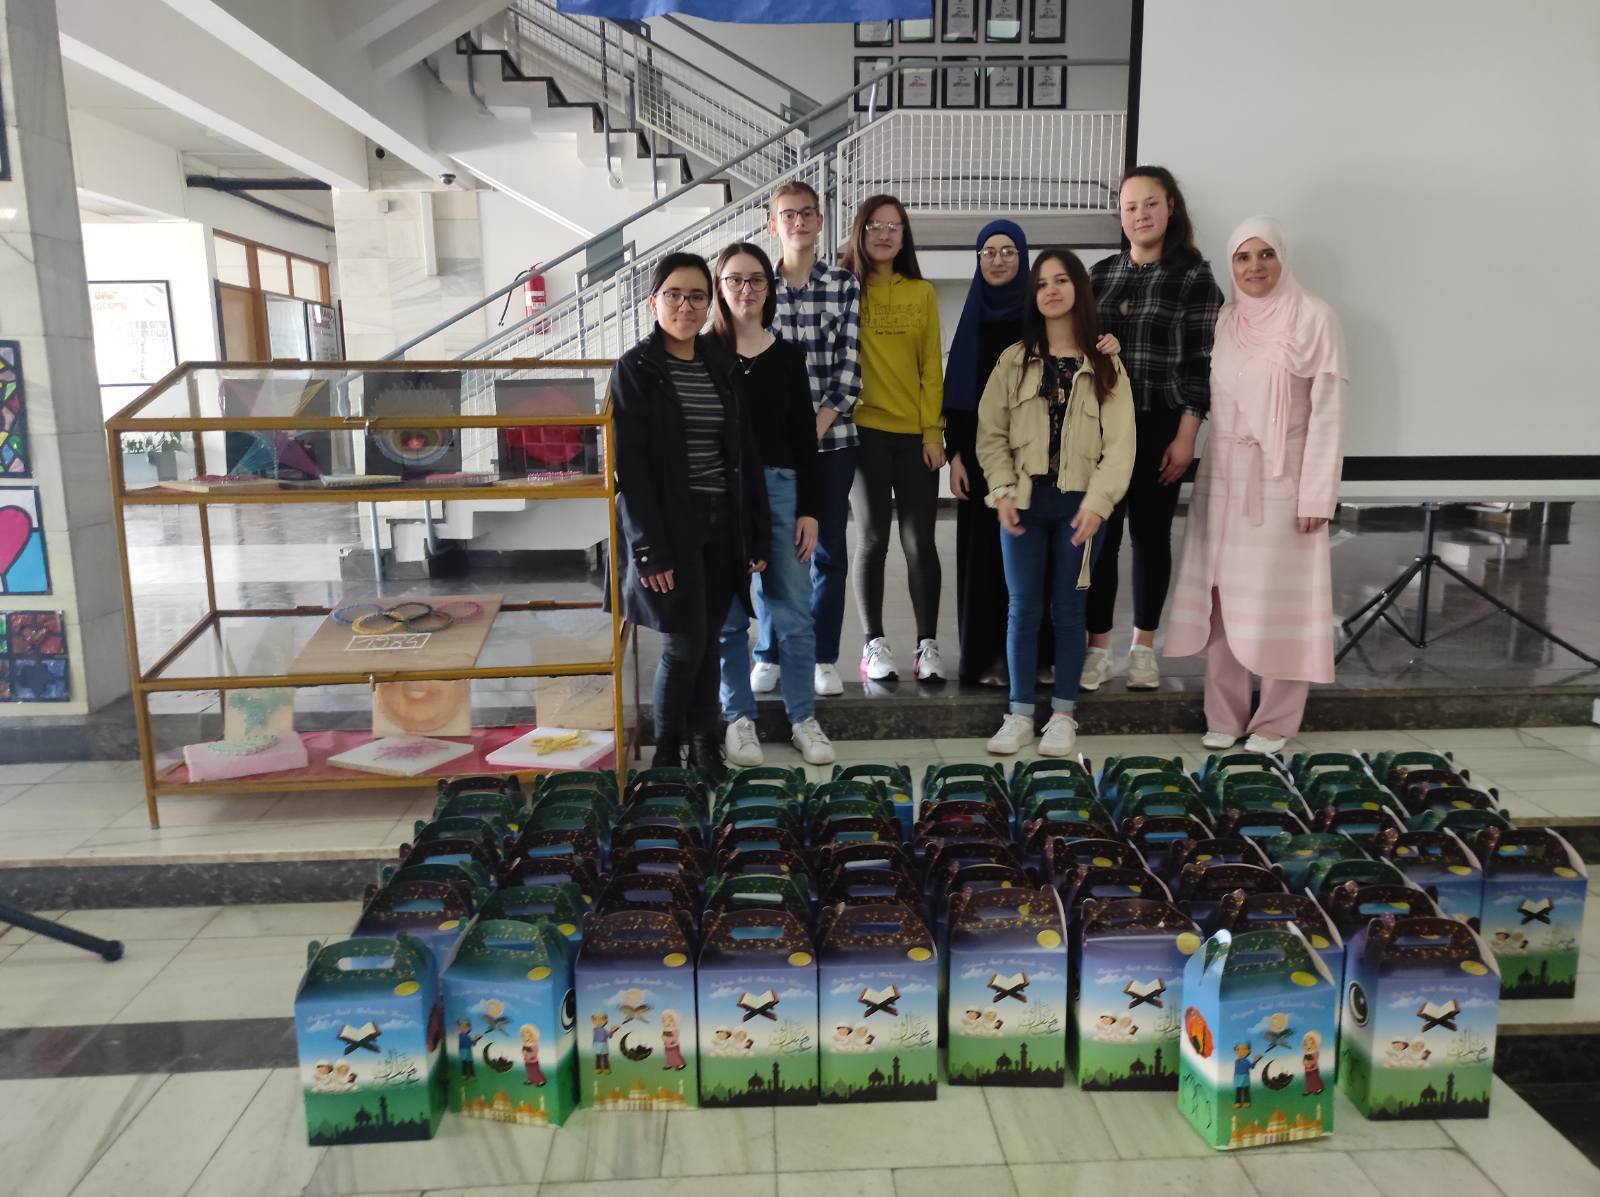 Chloe and a group of student standing in front of donation boxes for Eid.